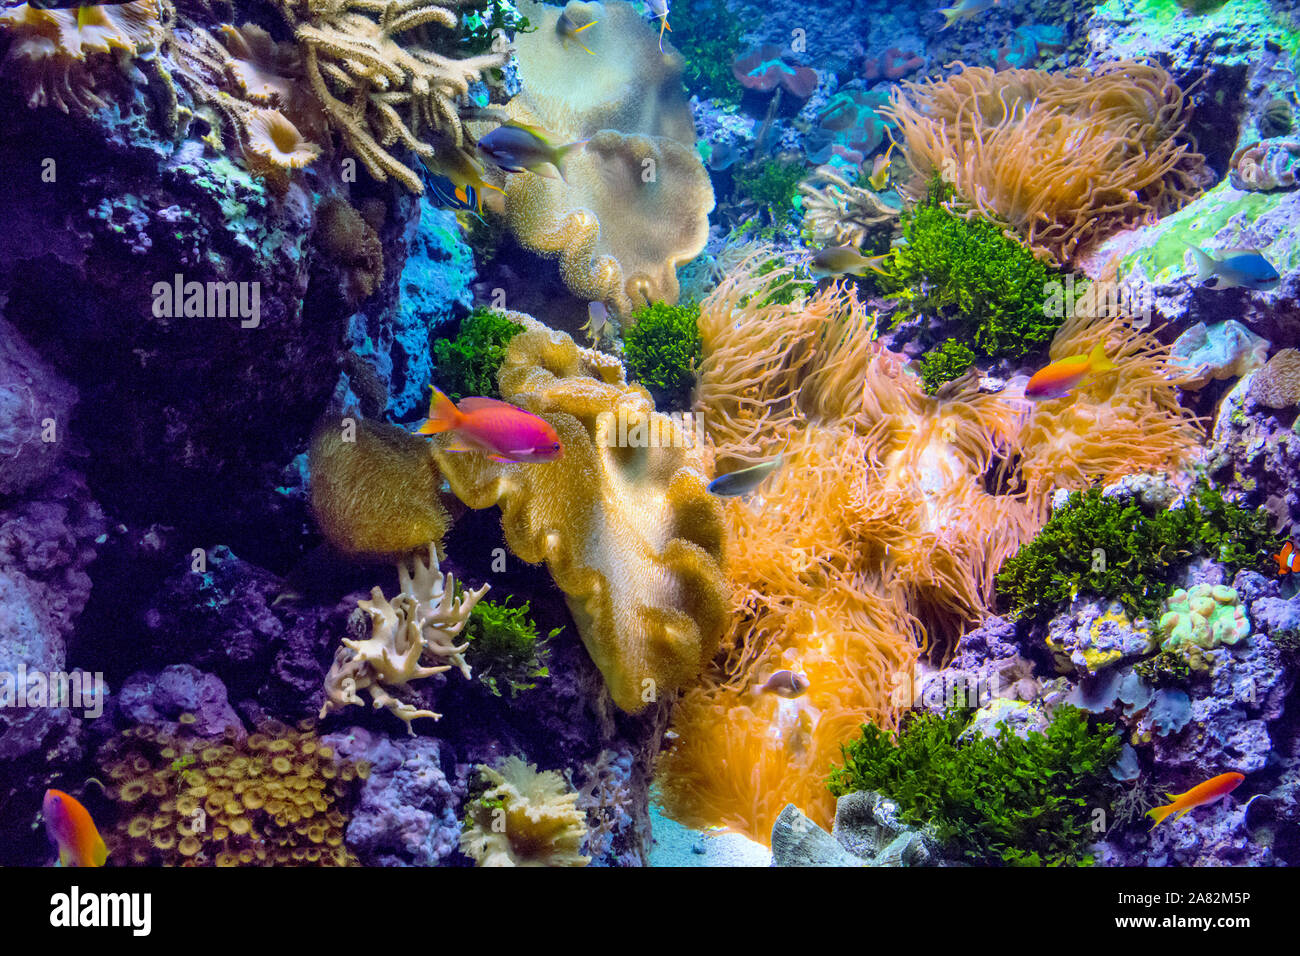 A colorful pink Fish swims in a salt water aquarium full of coral, anemone and live rock Stock Photo